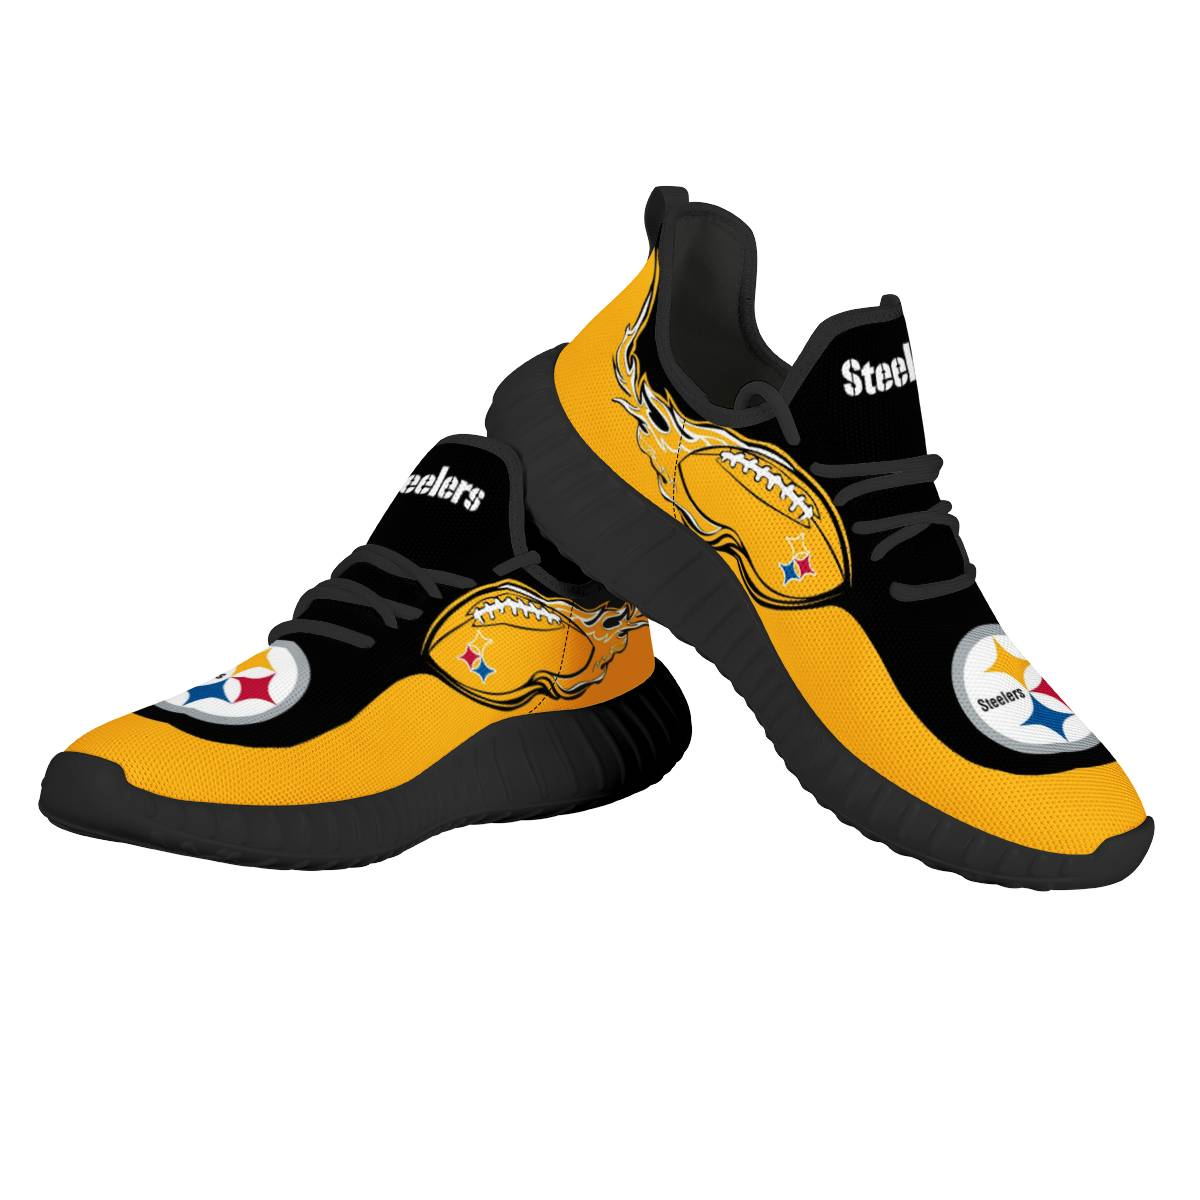 Women's NFL Pittsburgh Steelers Mesh Knit Sneakers/Shoes 009